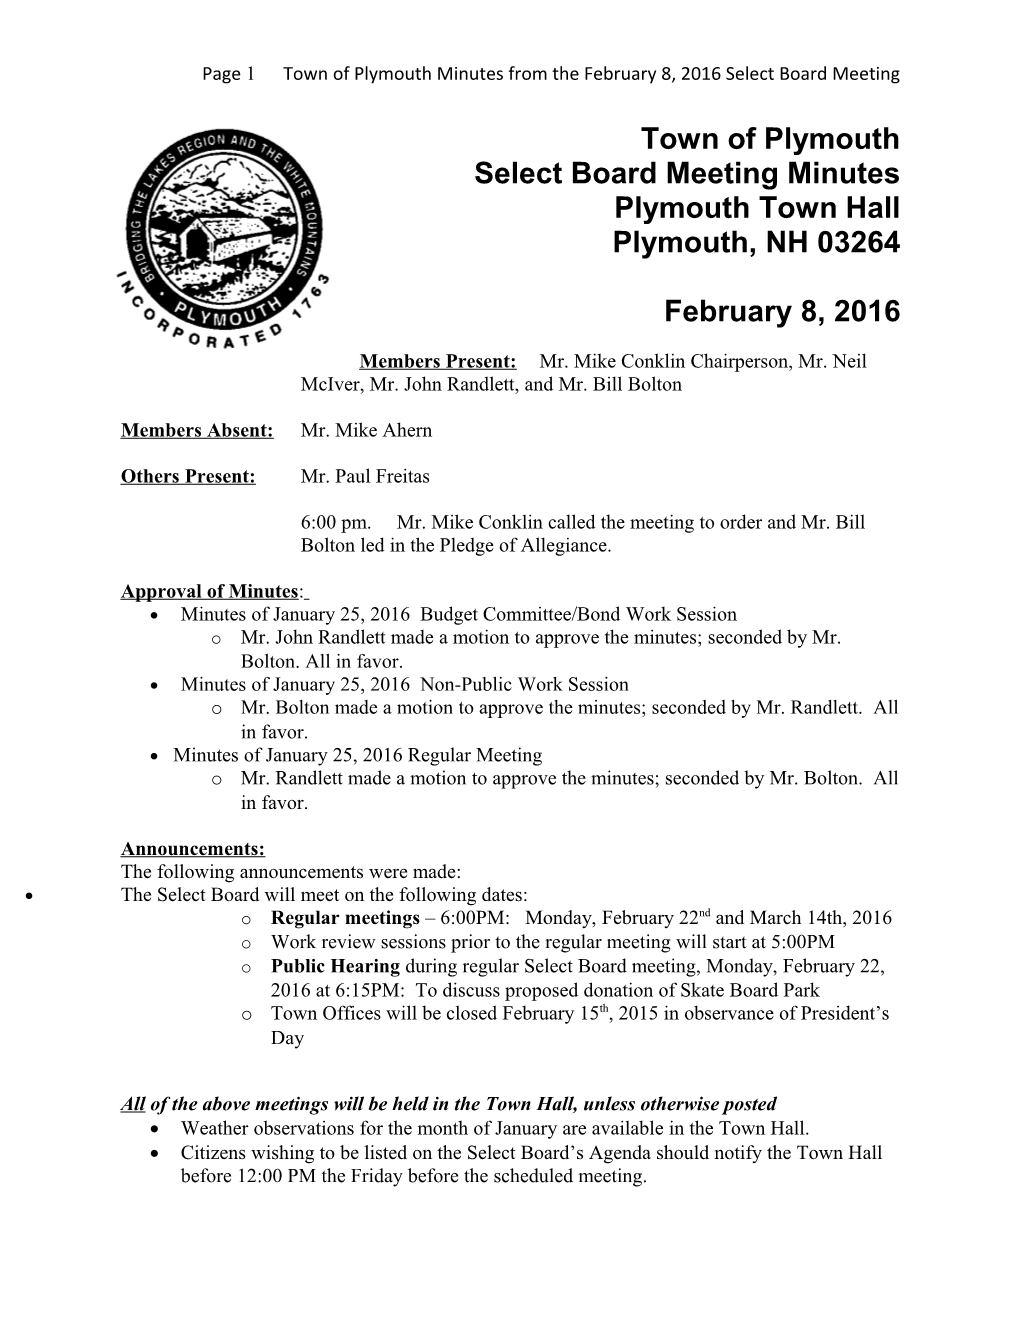 Page 1Town of Plymouth Minutes from Thefebruary 8, 2016 Select Board Meeting